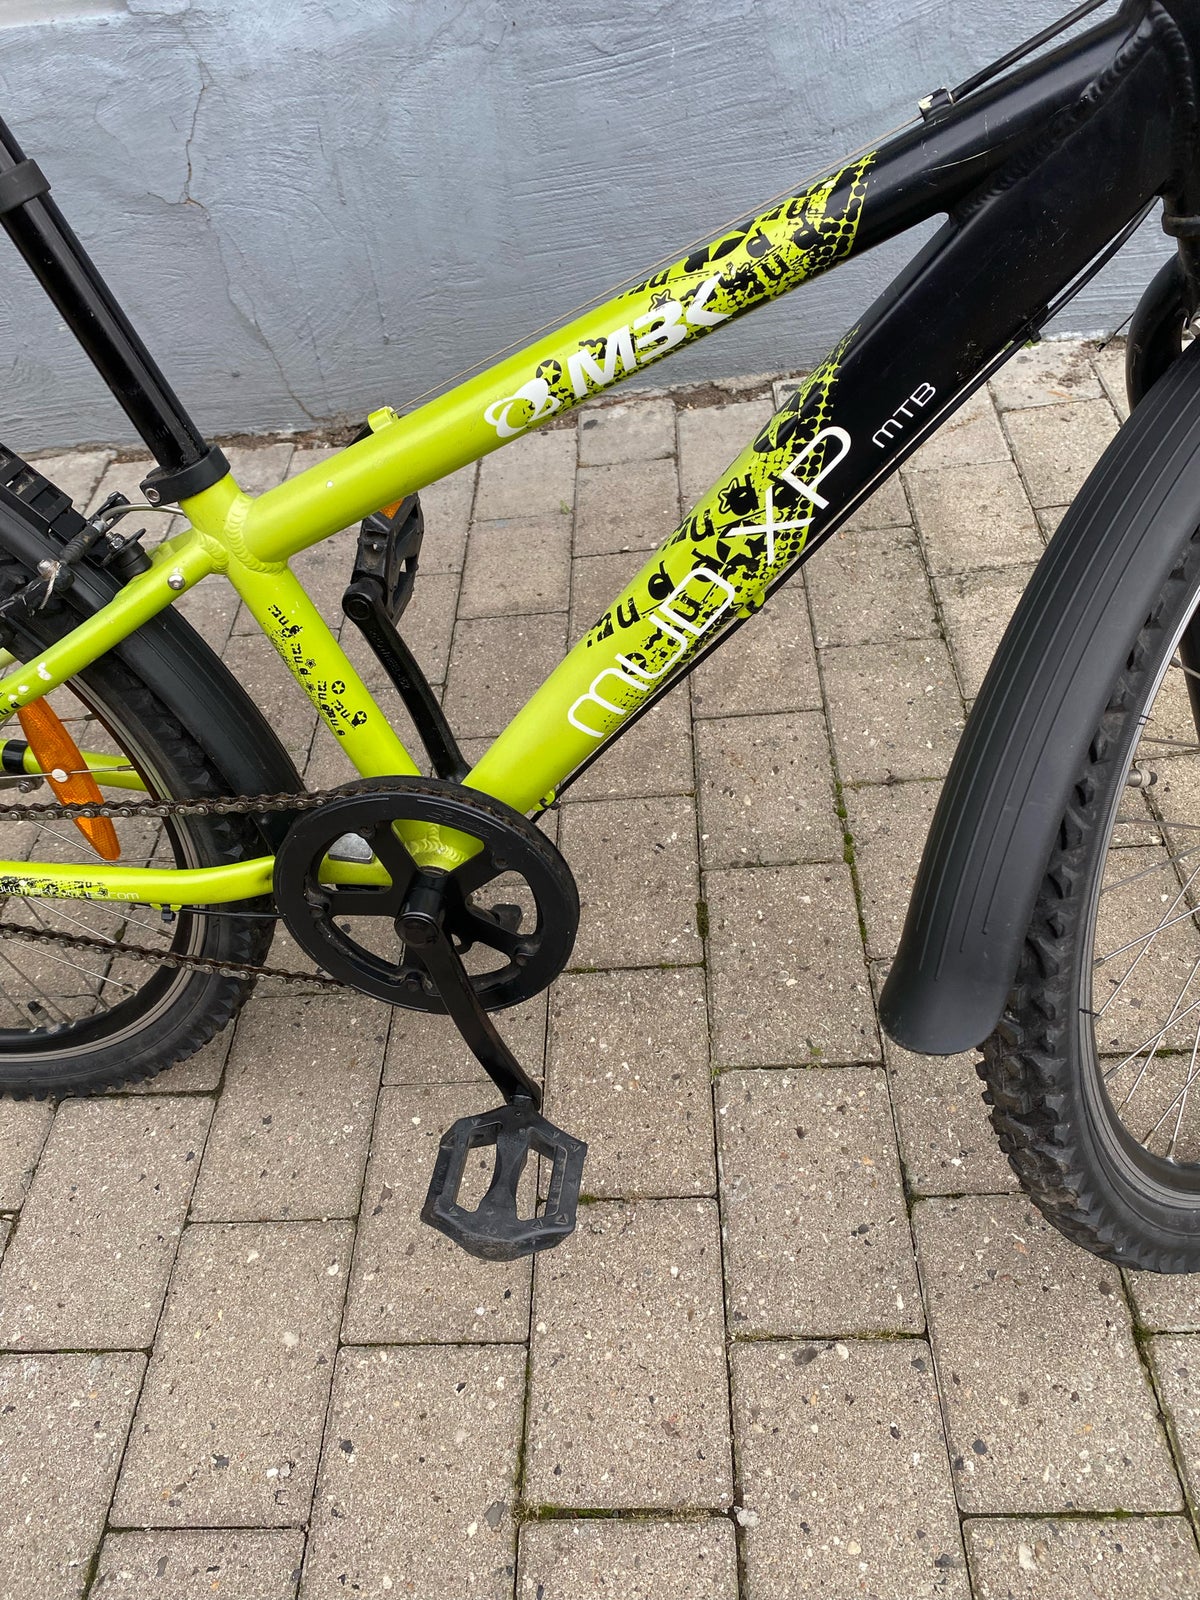 MBK Mud xp, anden mountainbike, 24 tommer hjul tommer